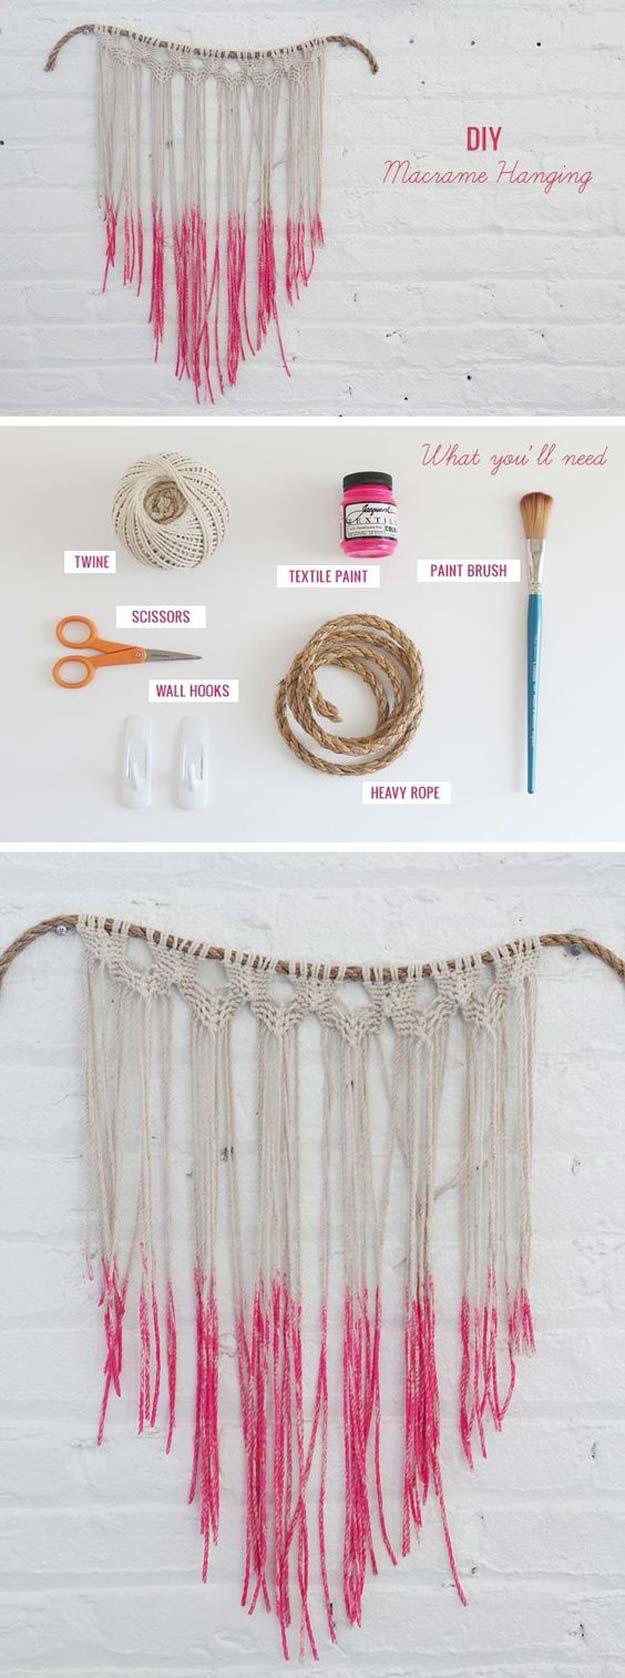 Pink DIY Room Decor Ideas - DIY Macrame Hanging - Cool Pink Bedroom Crafts and Projects for Teens, Girls, Teenagers and Adults - Best Wall Art Ideas, Room Decorating Project Tutorials, Rugs, Lighting and Lamps, Bed Decor and Pillows #teencrafts #roomdecor #pink